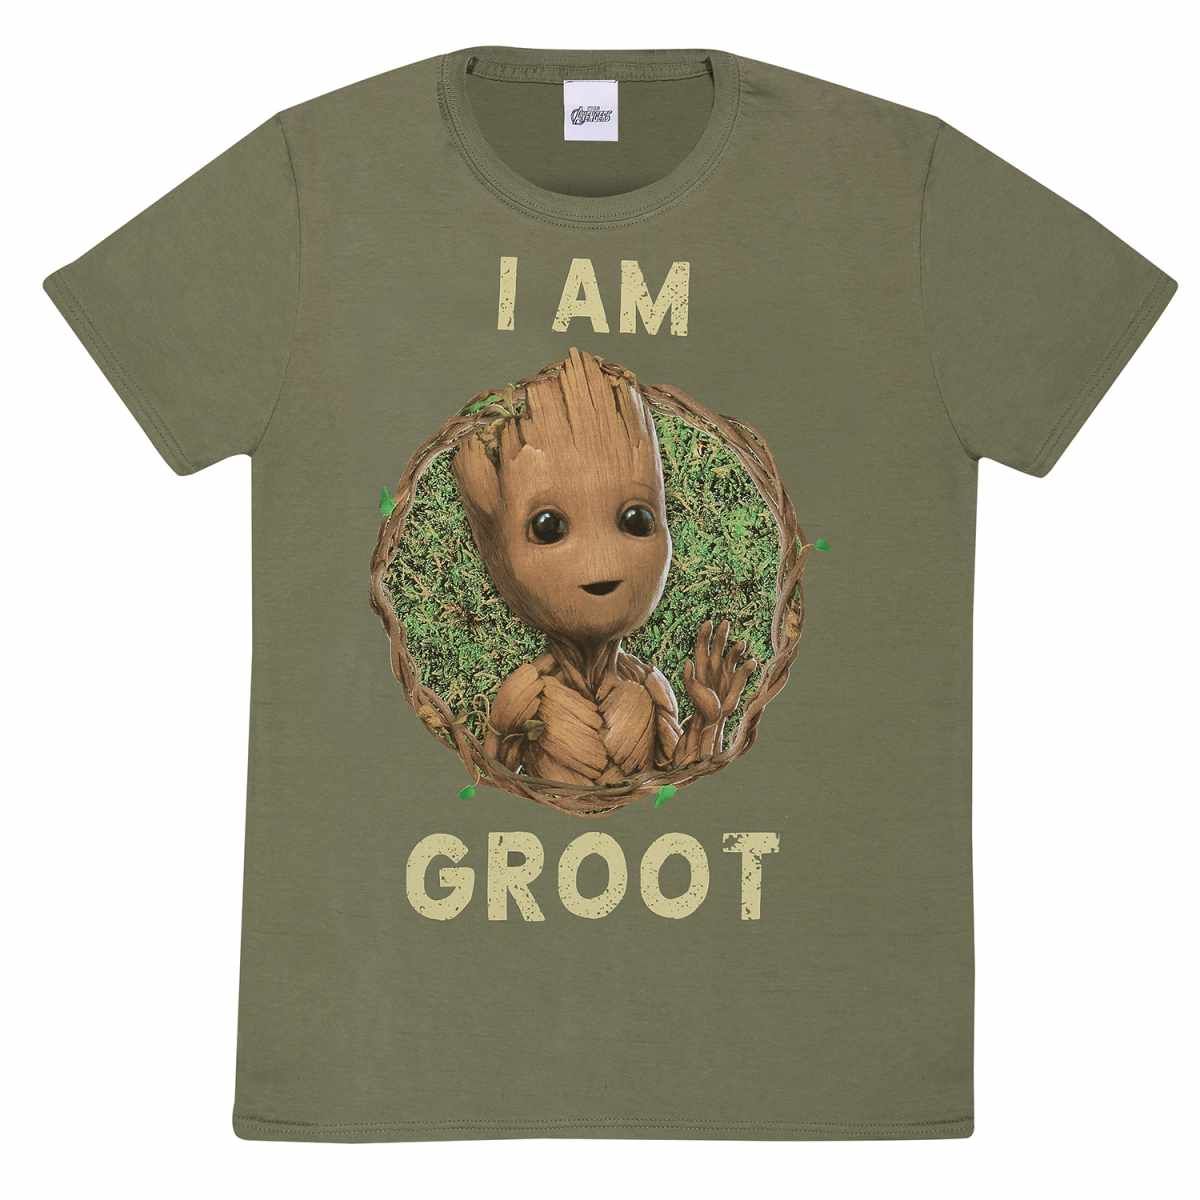 Of Merchoid Am Your Buy Groot Guardians Galaxy Shipping) - (Free The I T-Shirt